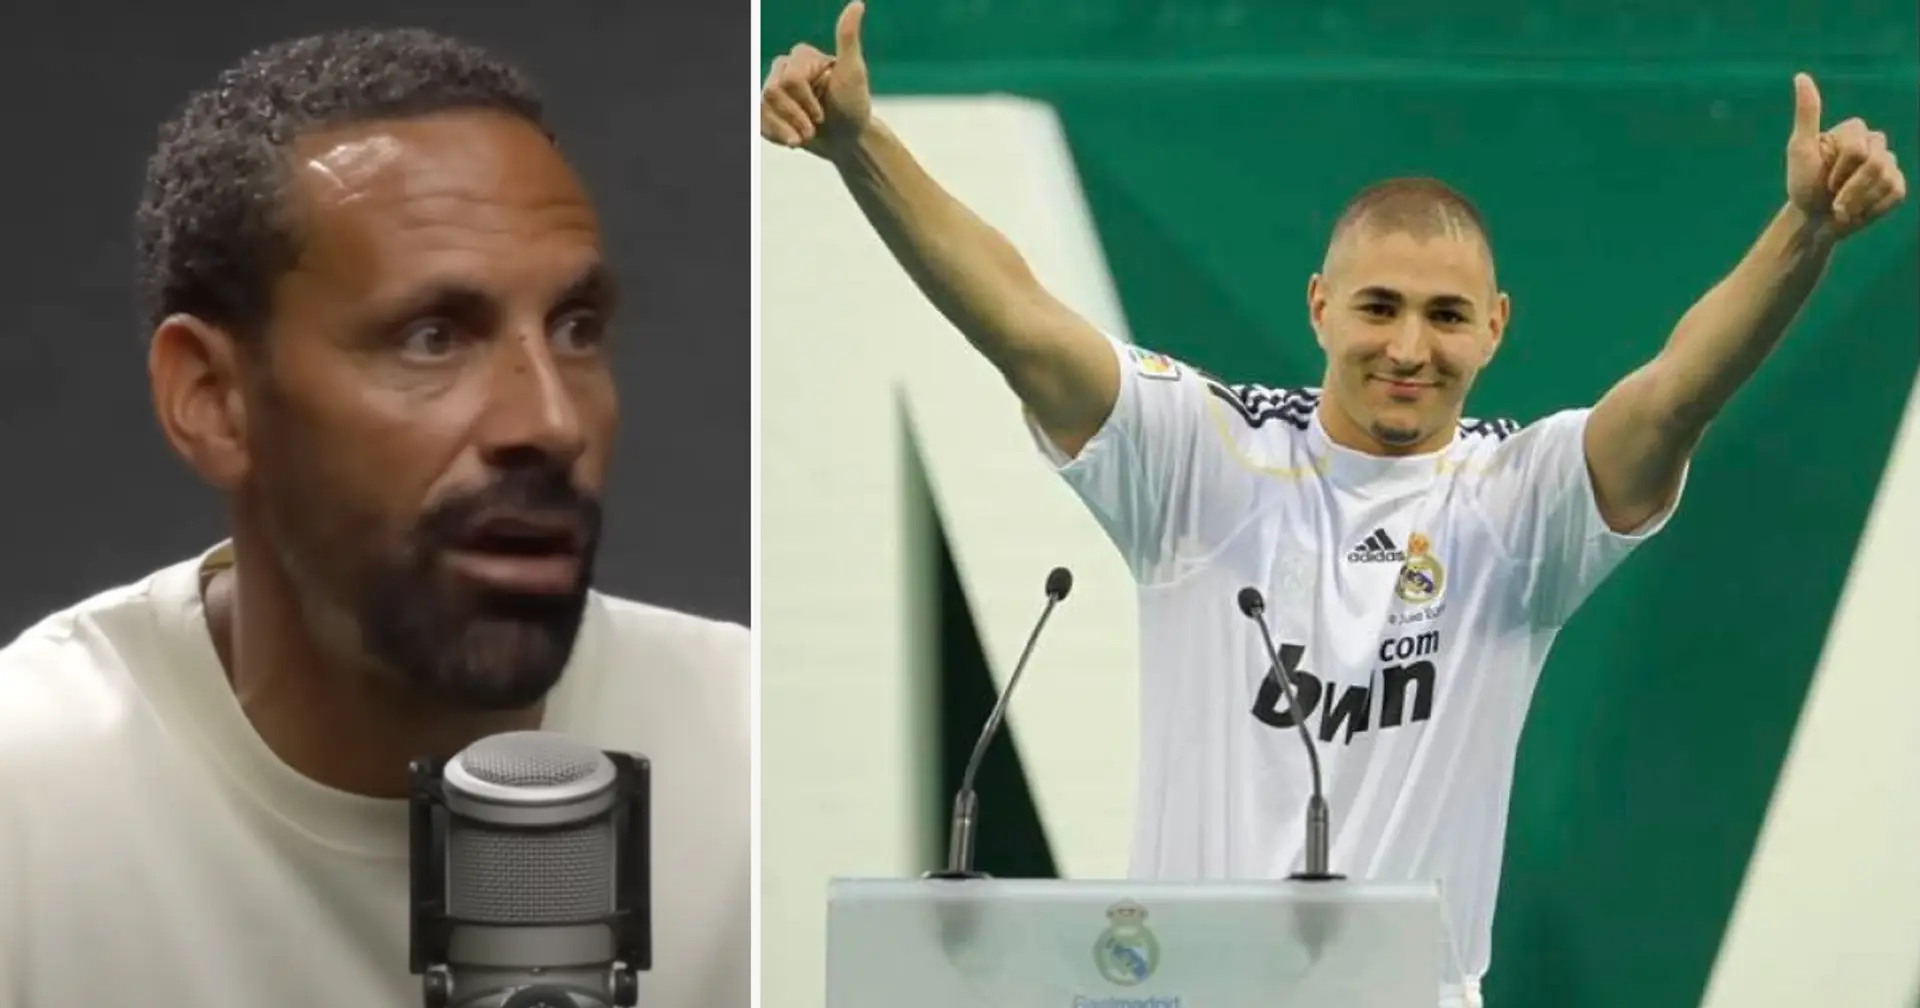 'Match made in heaven': Rio Ferdinand reveals main man behind Benzema's move to Madrid, not Perez